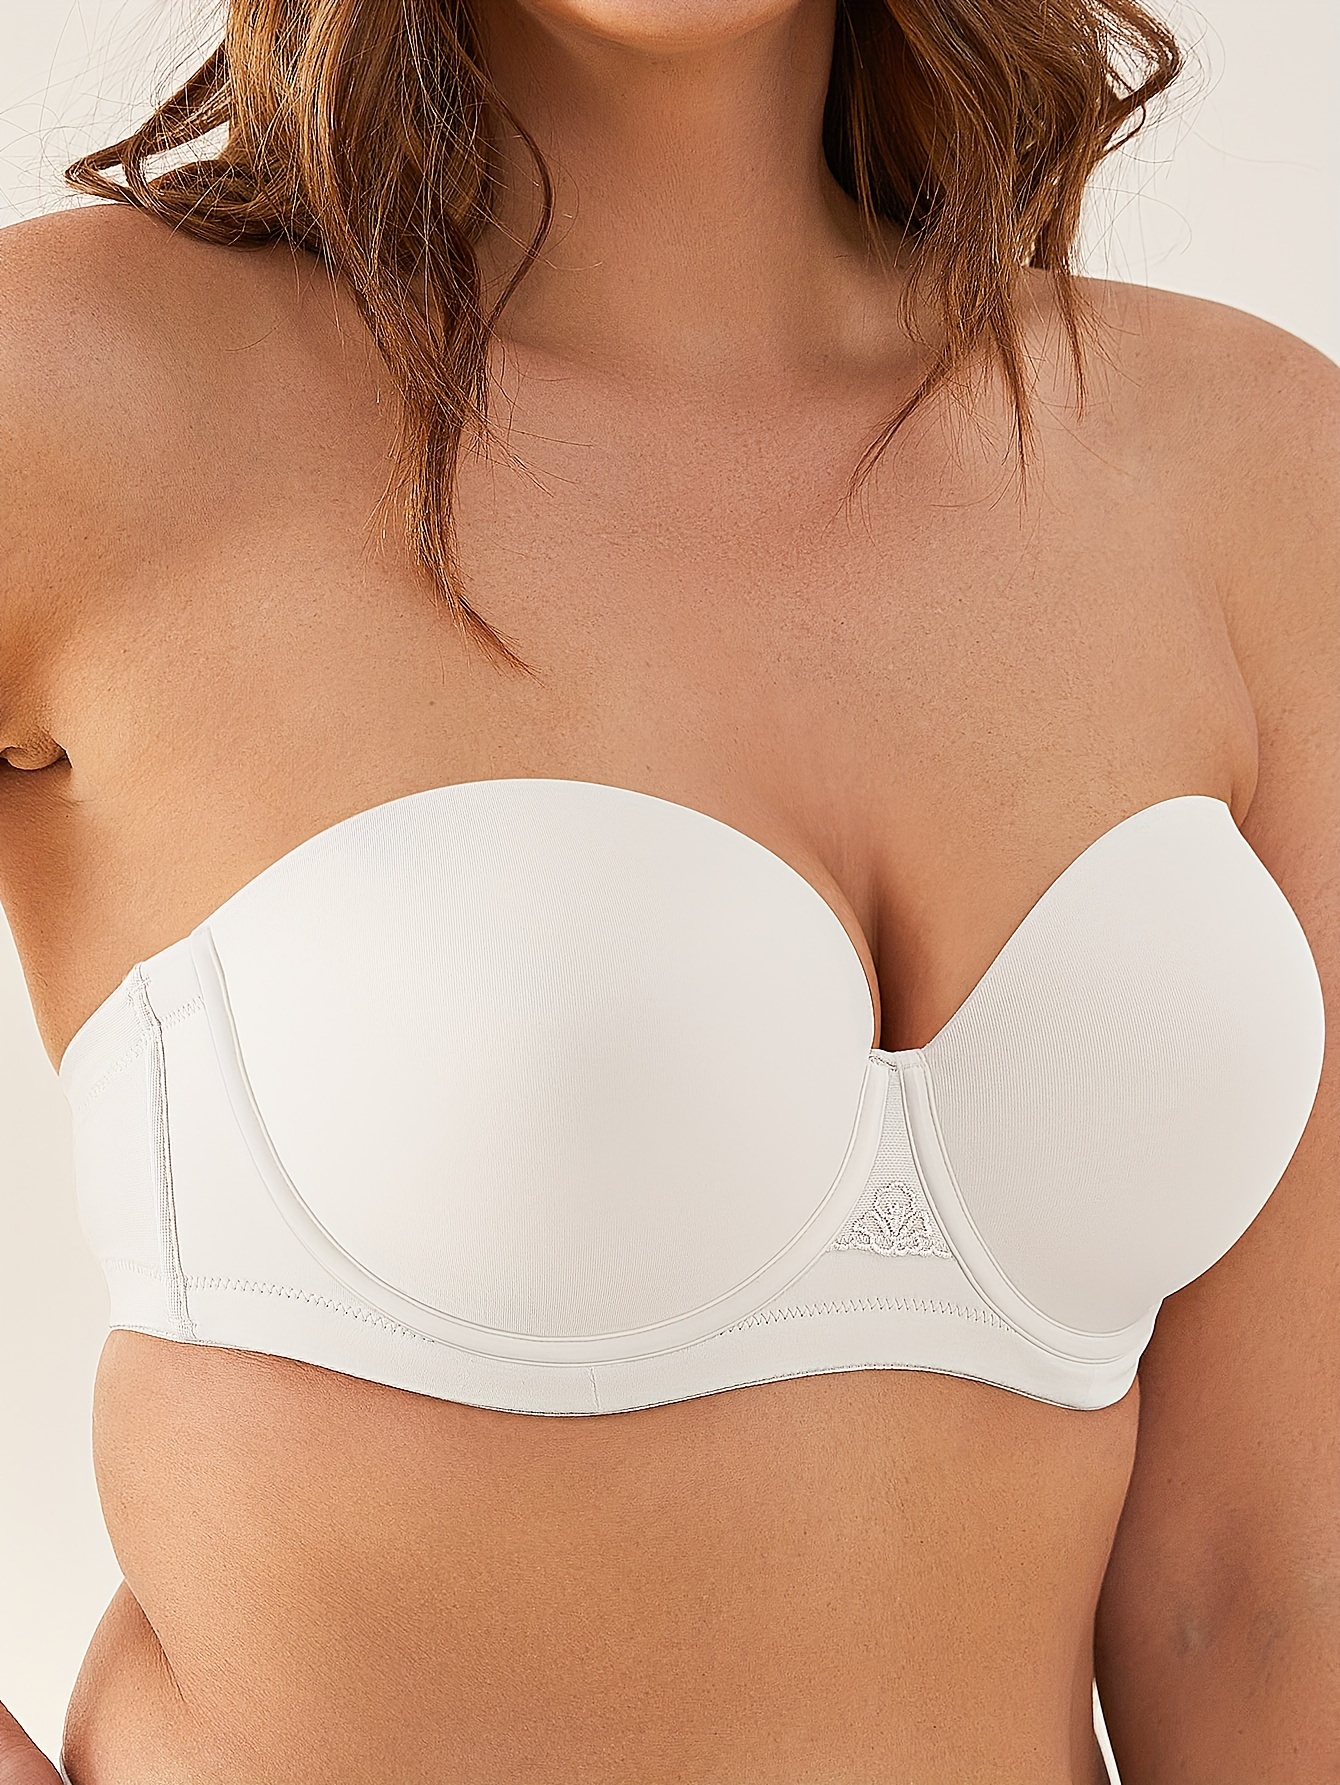 Deyllo Women's Strapless Push Up Full Cup Plus Size Underwire Padded Bra,  White 42D